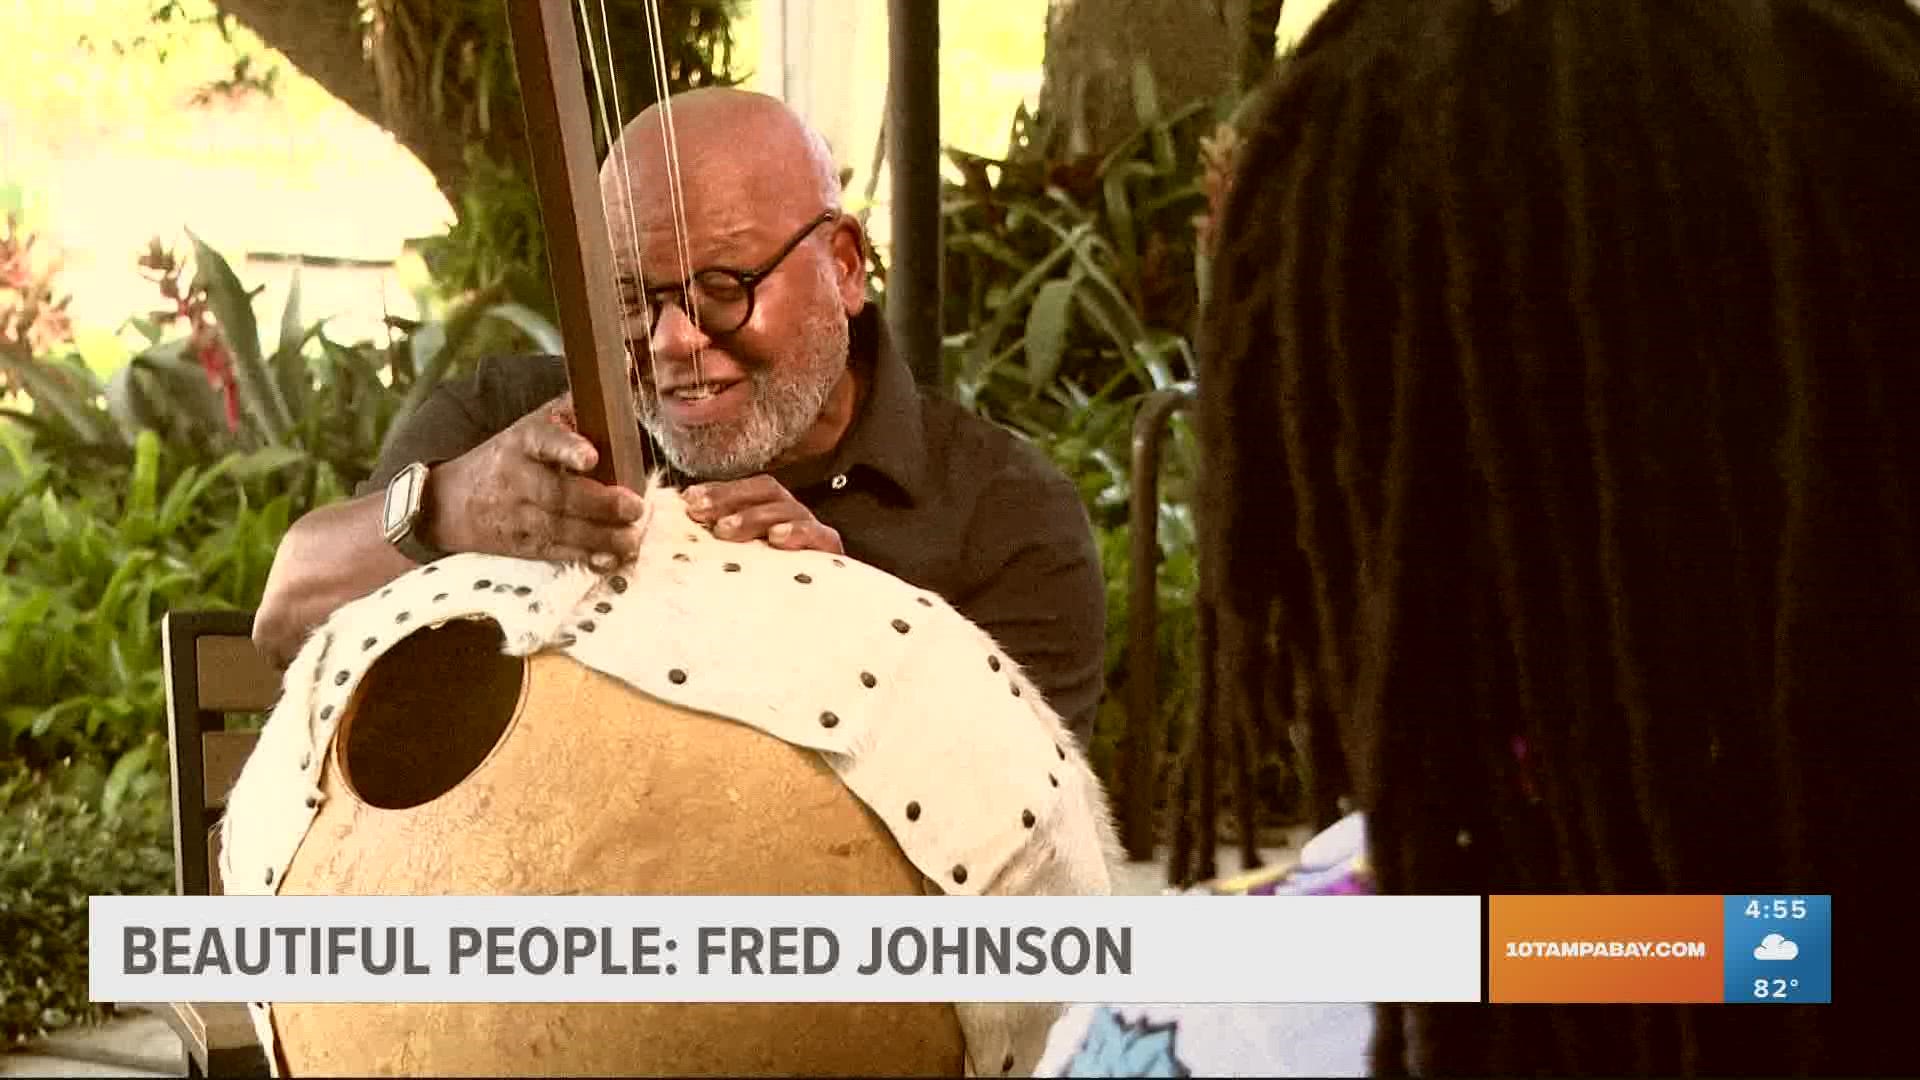 Fred Johnson is currently an artist in residence at the Straz in Tampa. Aside from his long music history in Tampa, he's always looking to give back to his community